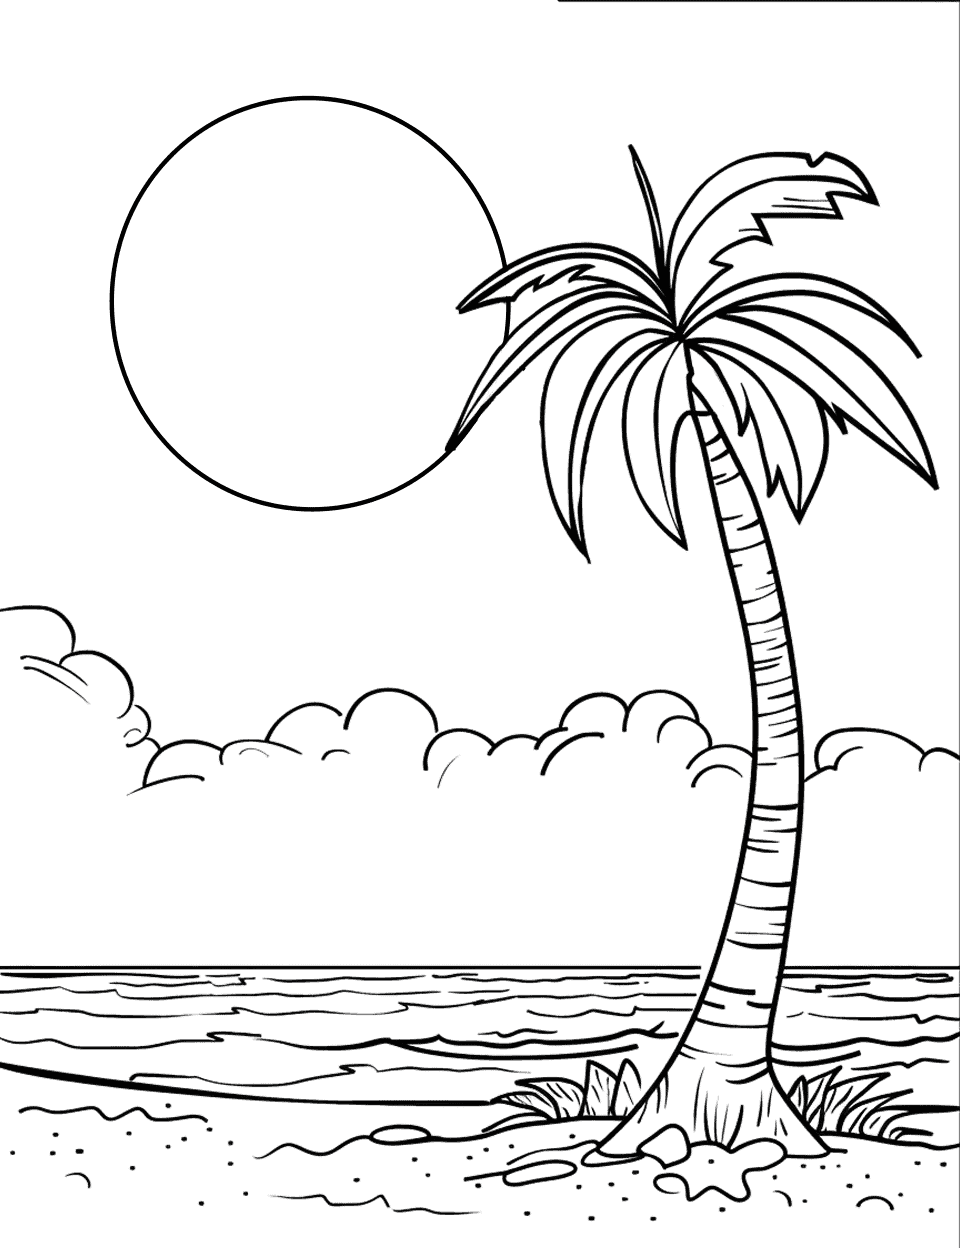 Sun and Single Palm Tree Coloring Page - A solitary palm tree under the bright sun on a sandy beach.